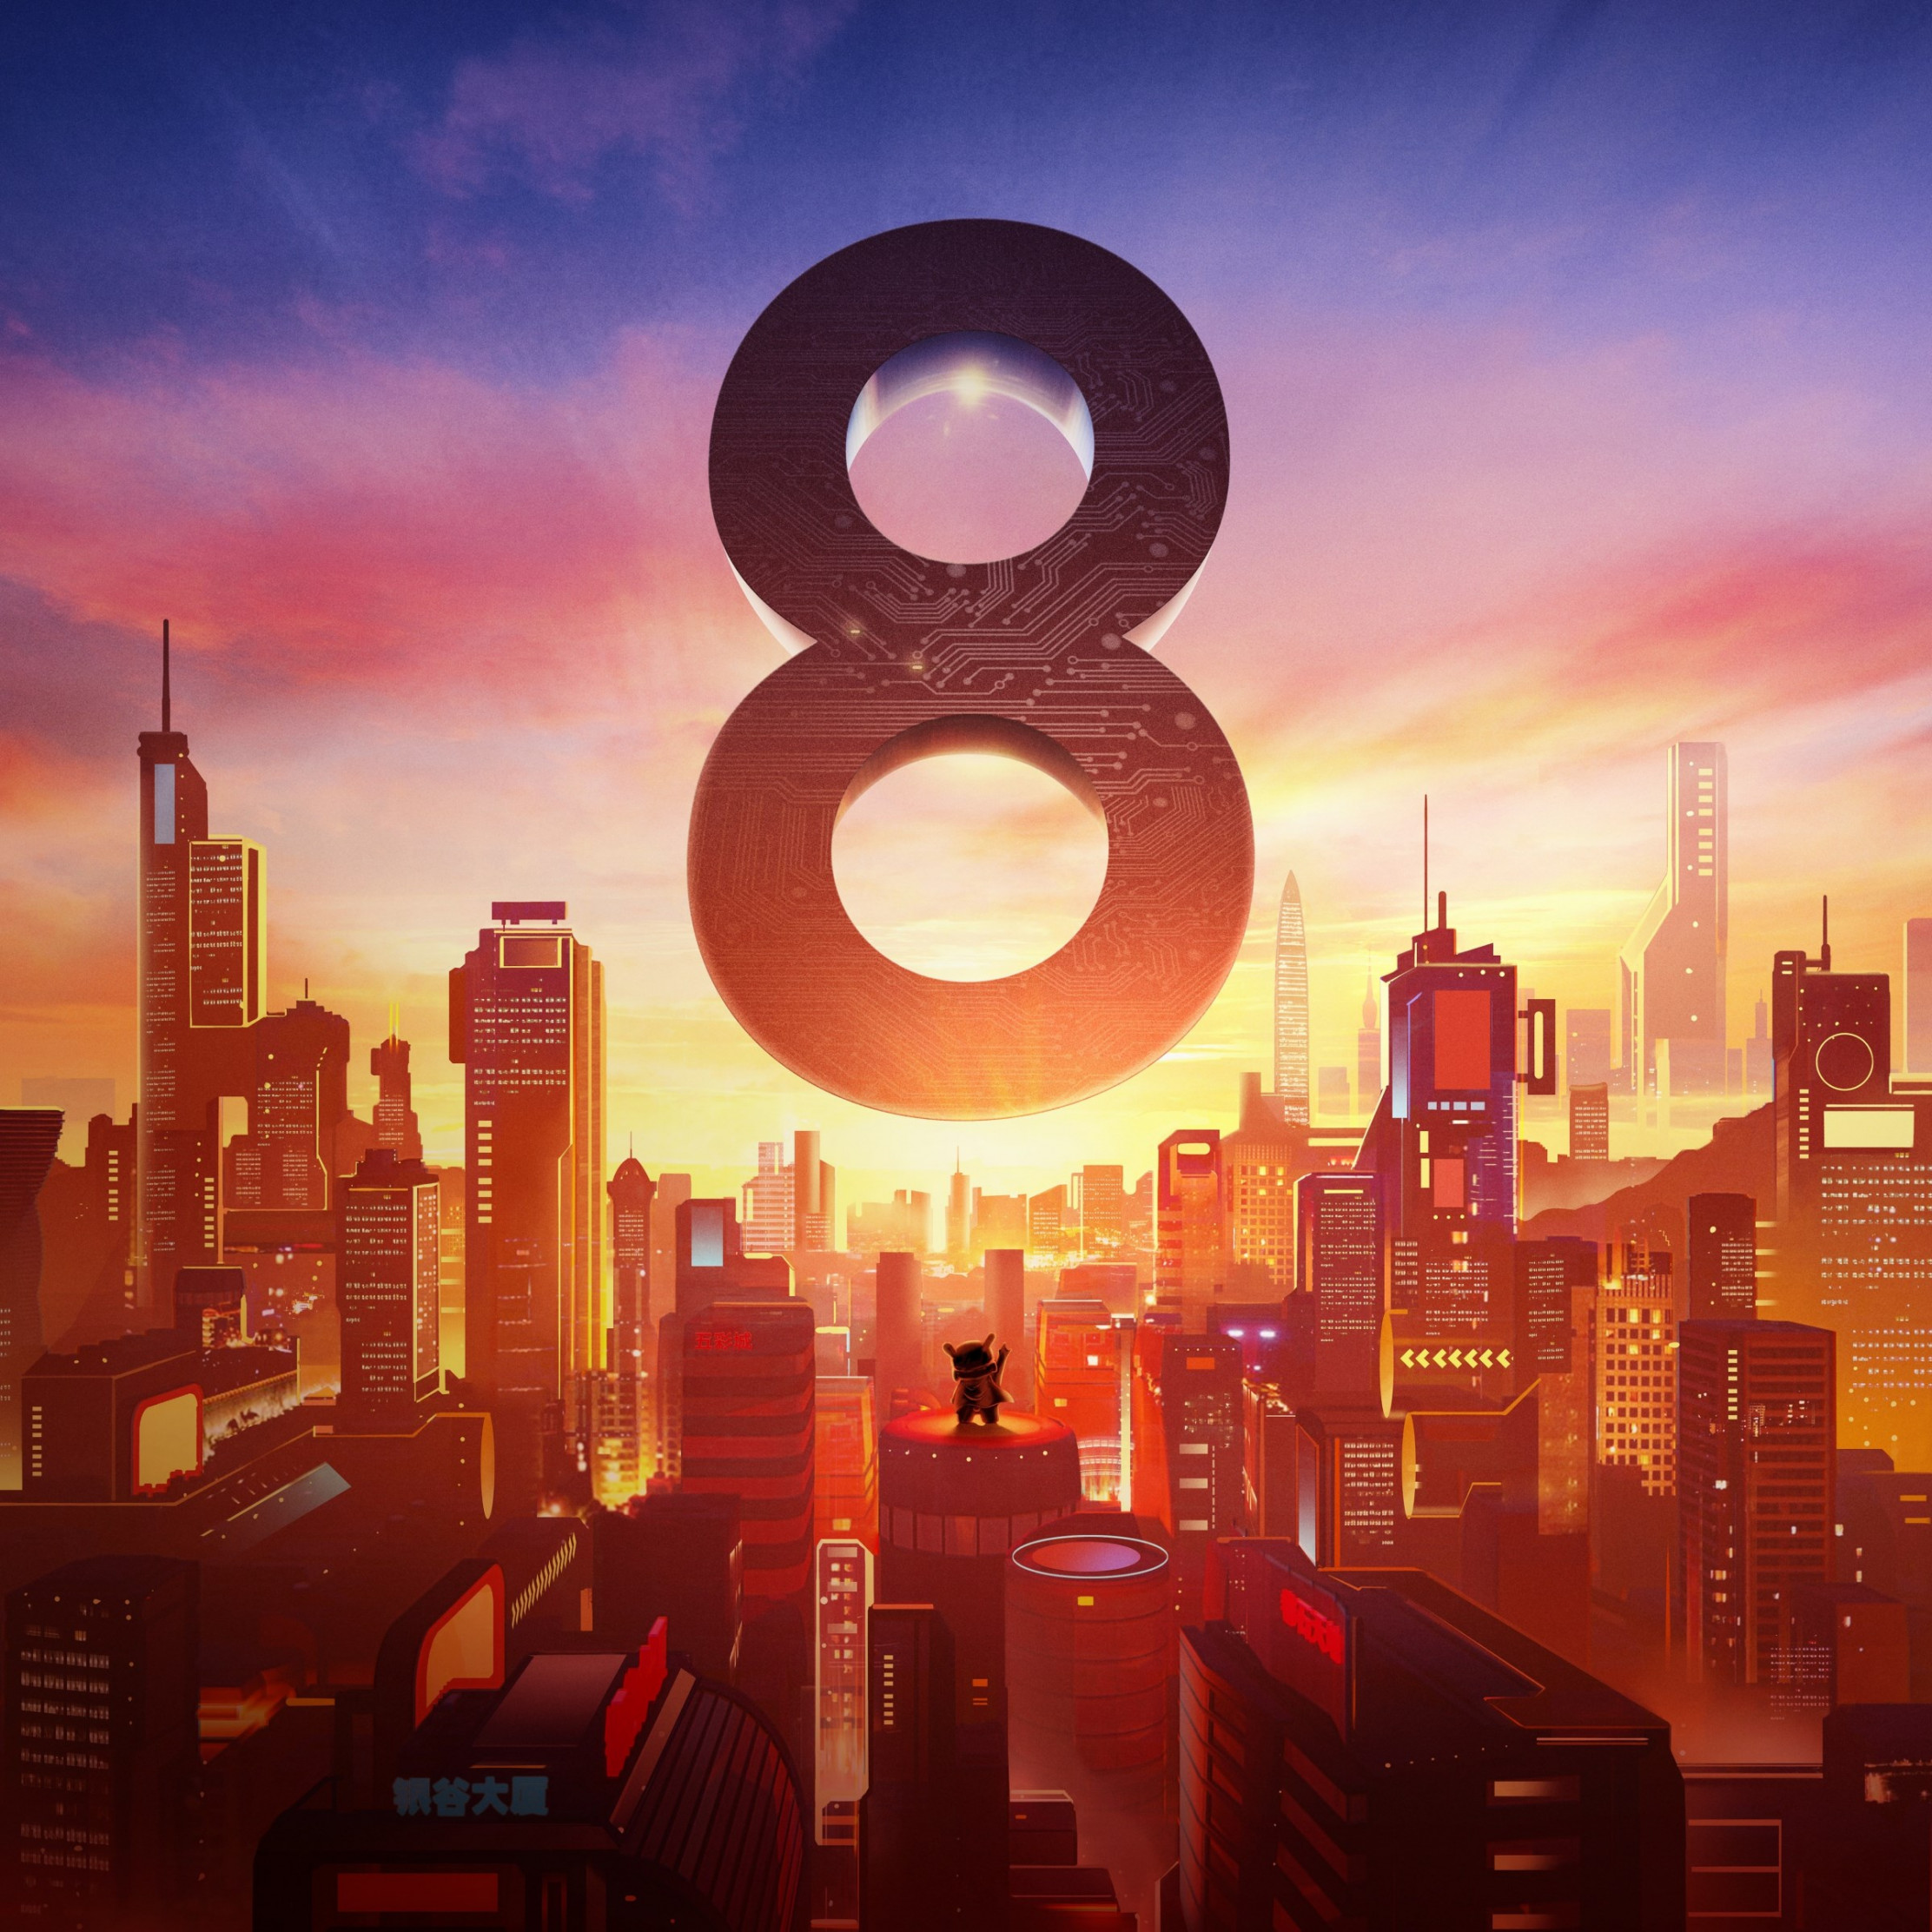 Xiaomi Mi 8. Poster from the launch event wallpaper 2224x2224